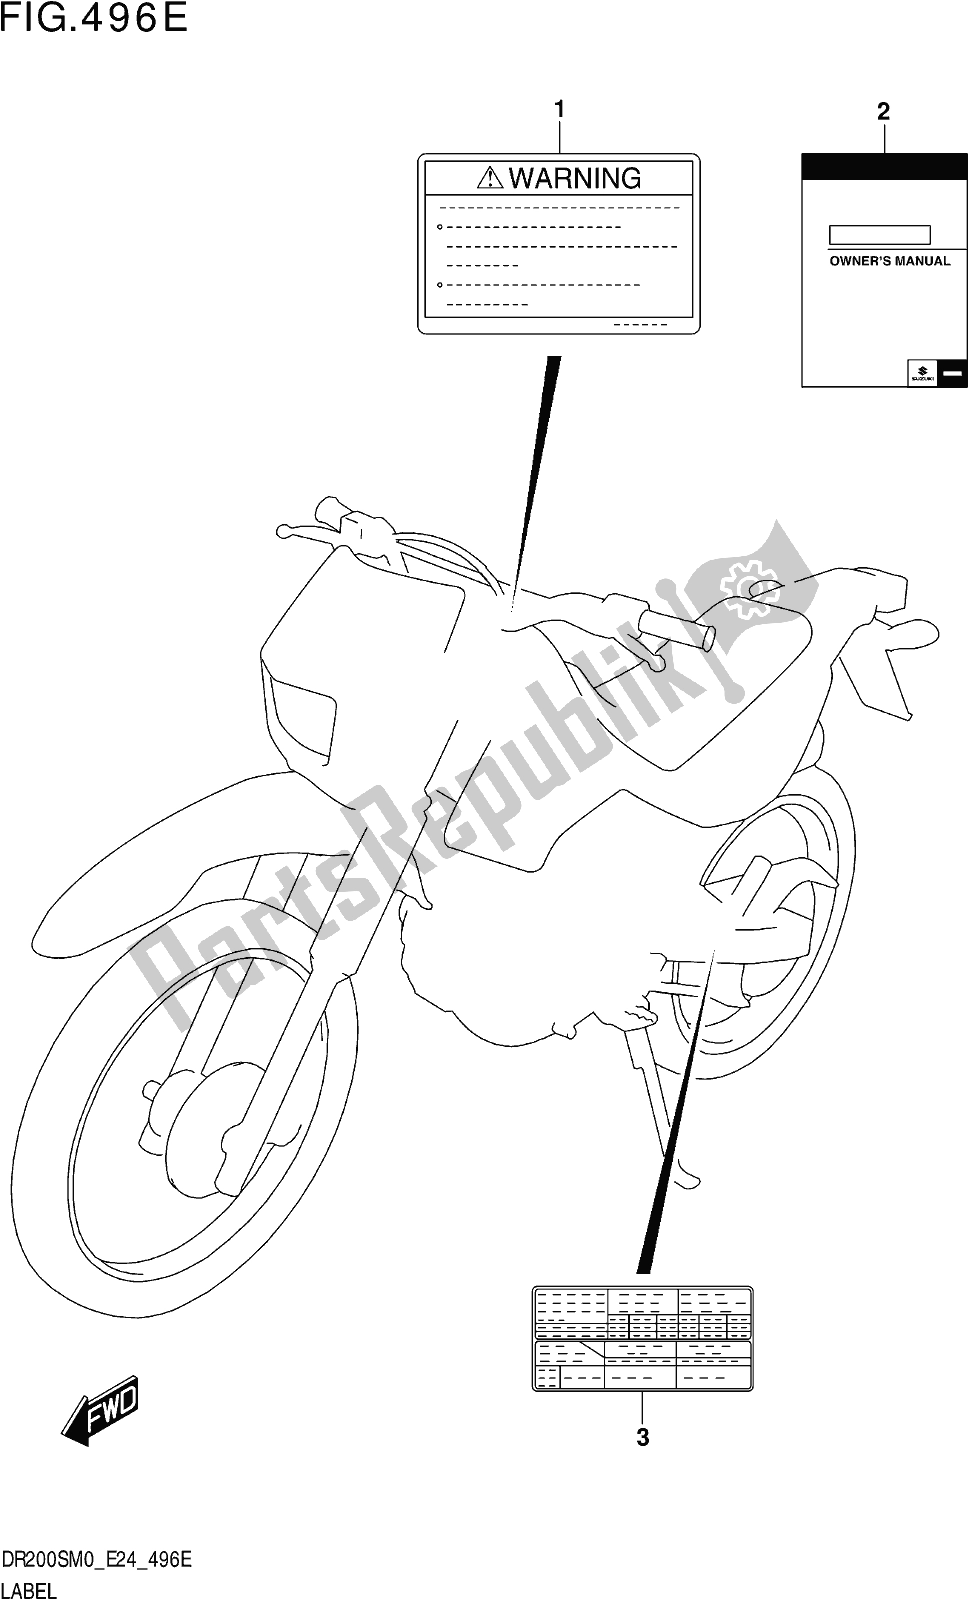 All parts for the Fig. 496e Label of the Suzuki DR 200S 2020